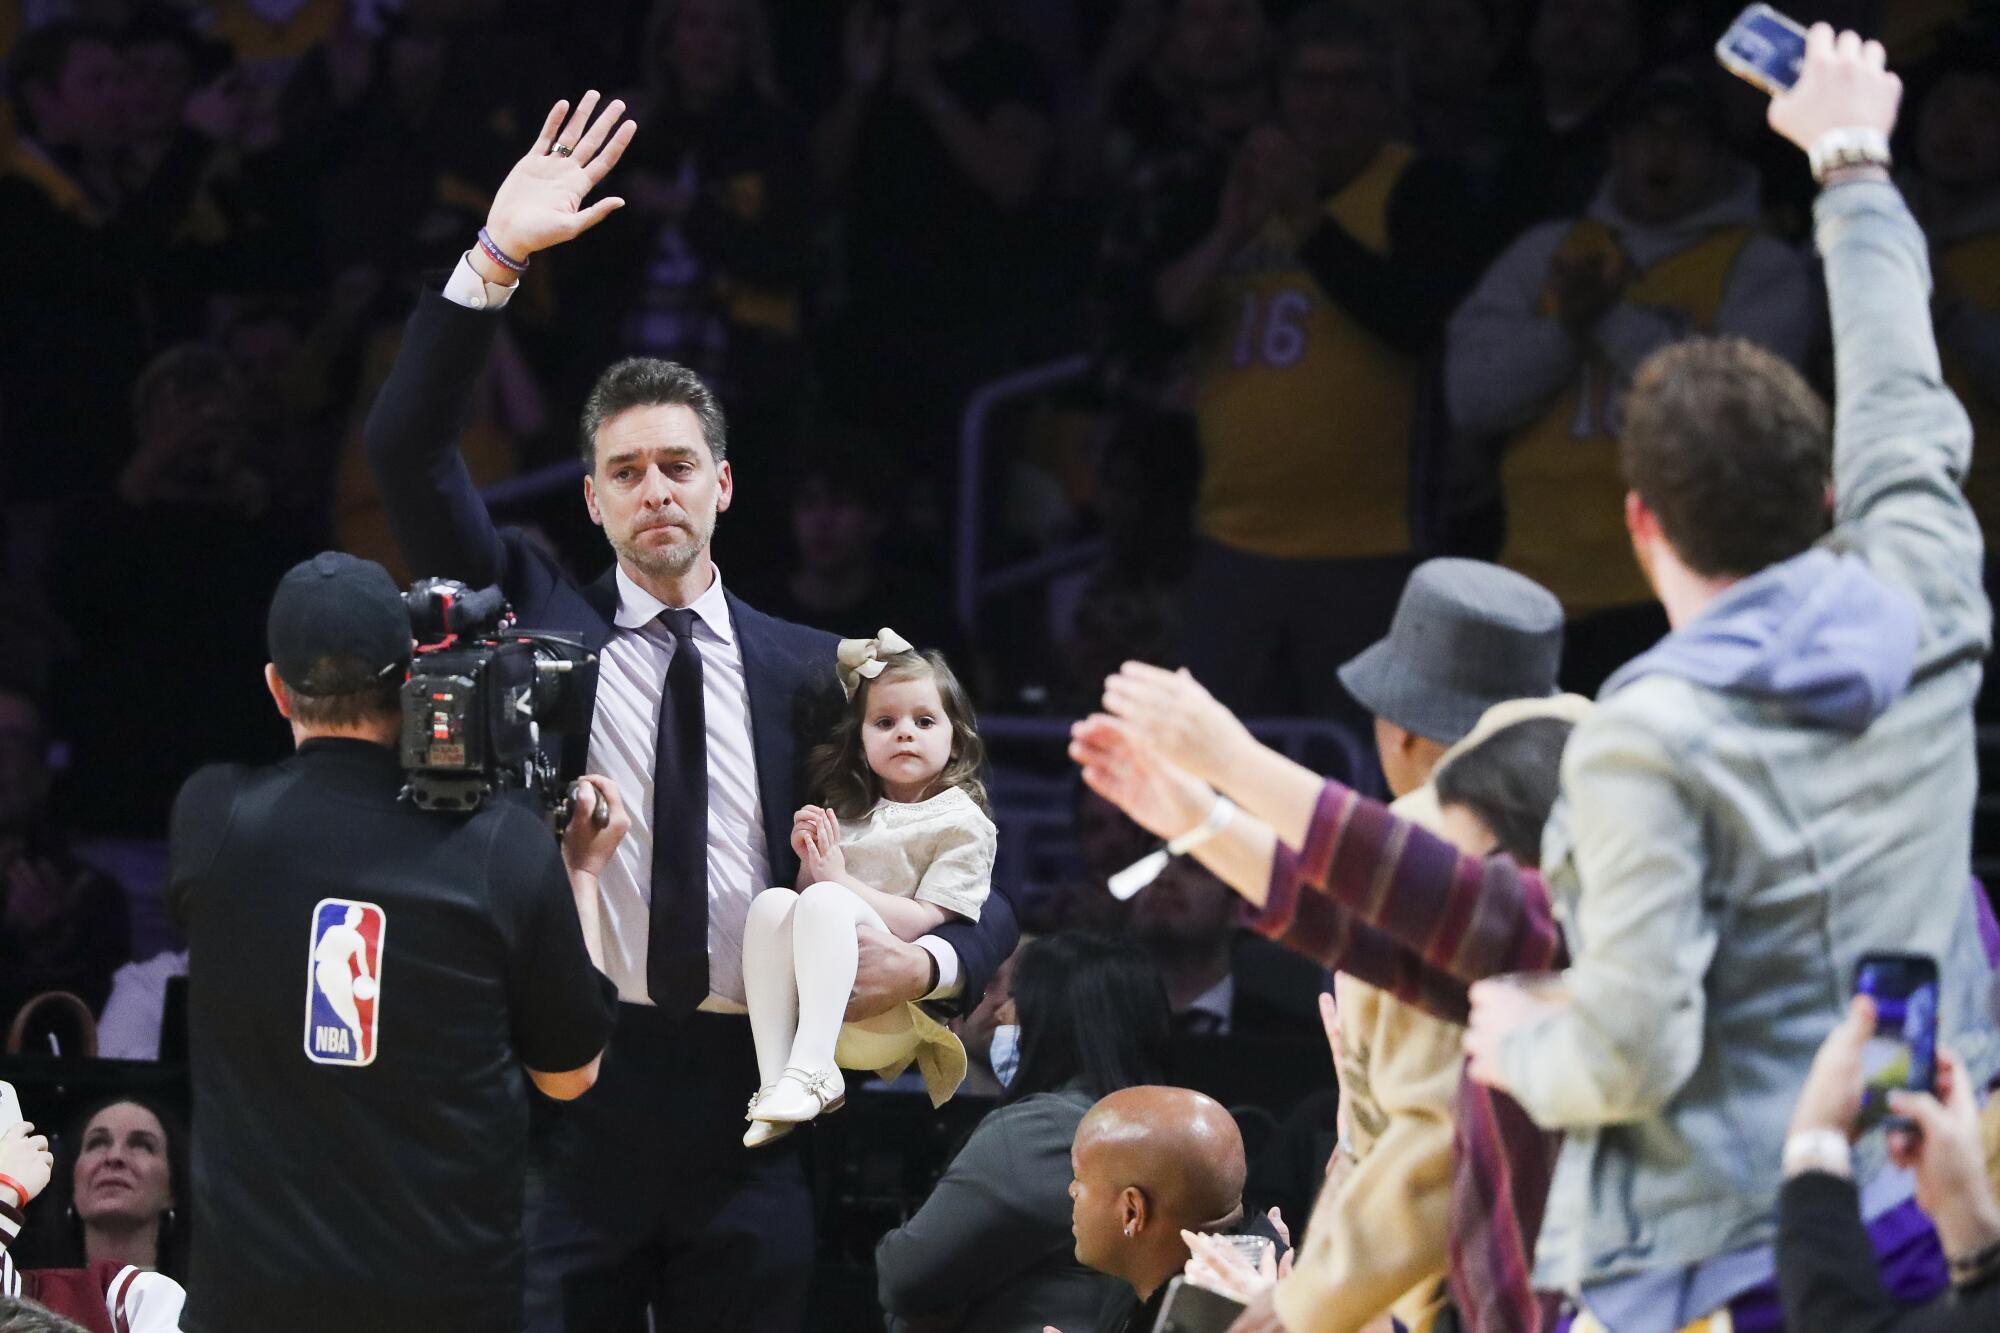 Pau Gasol waves to the fans while holding onto his daughter Elisabet Gianna Gasol as he makes his way on the court.